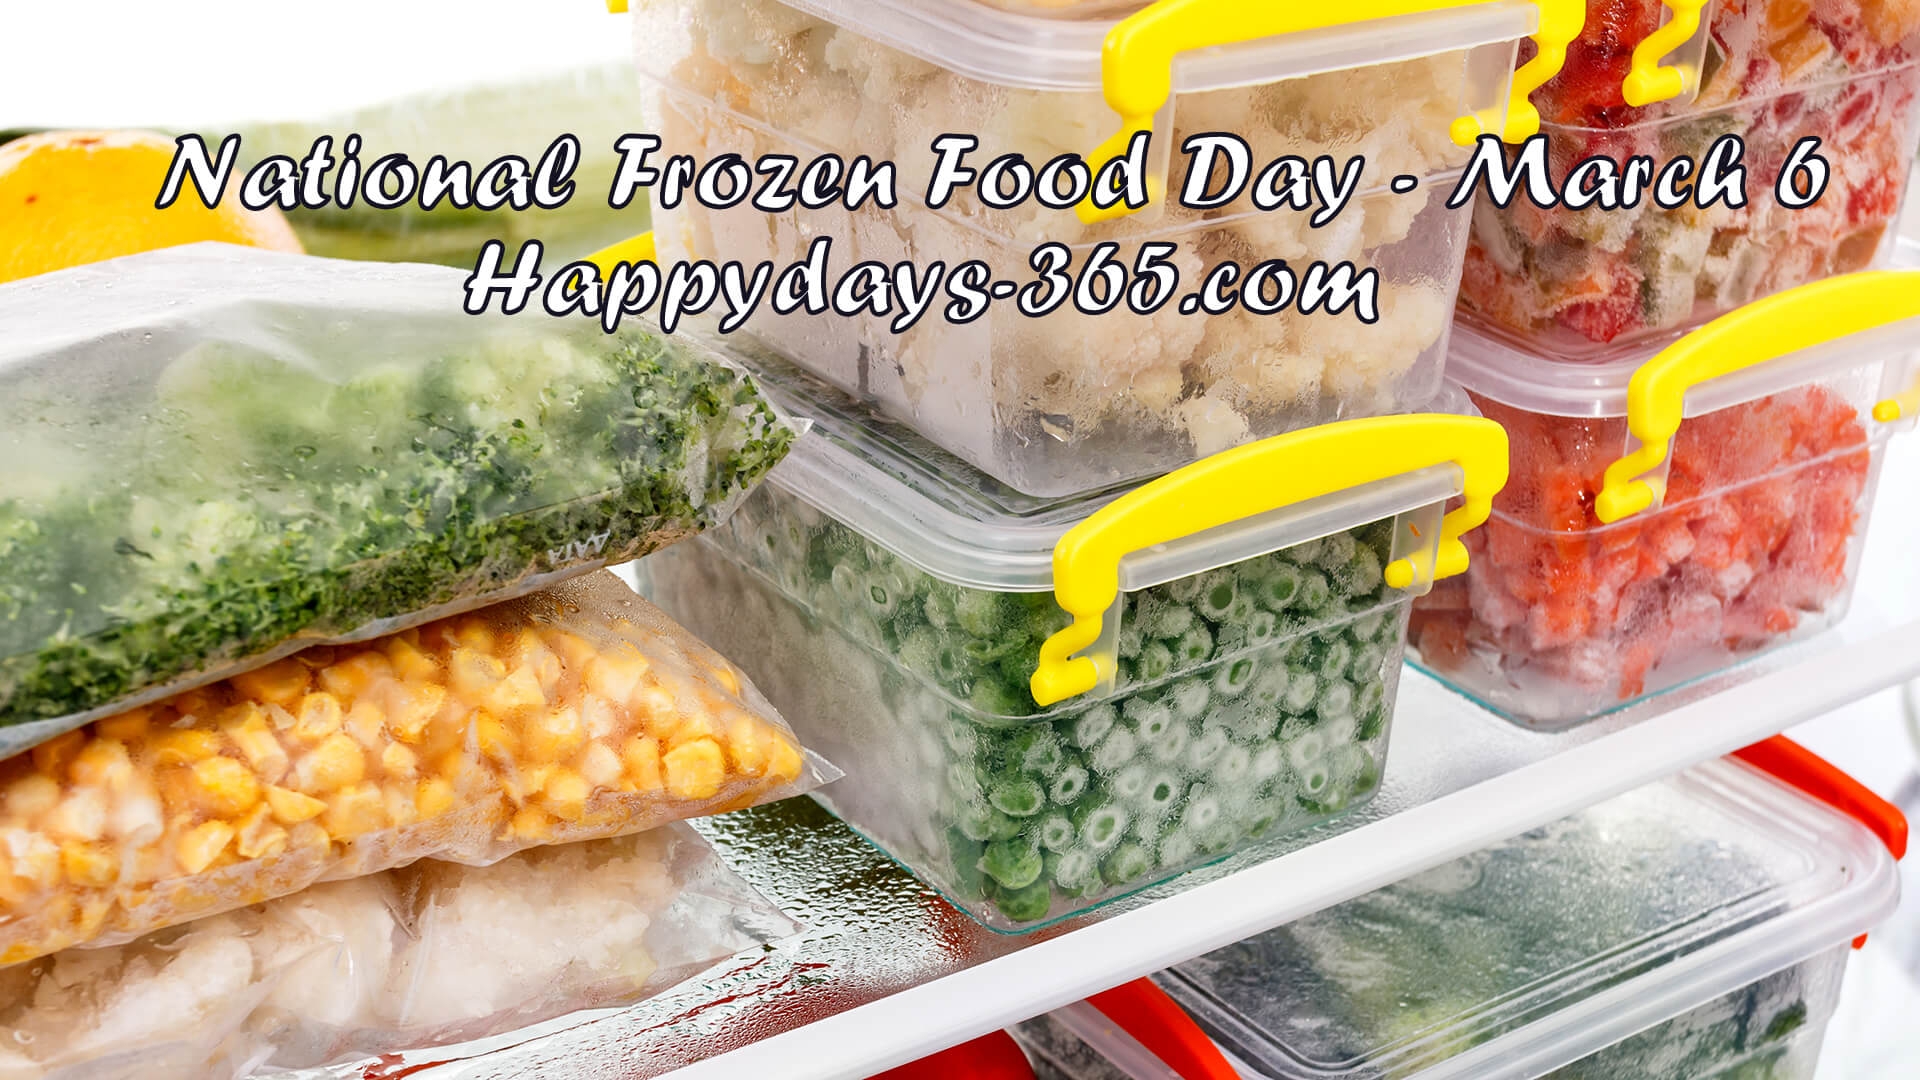 National Frozen Food Day 2019